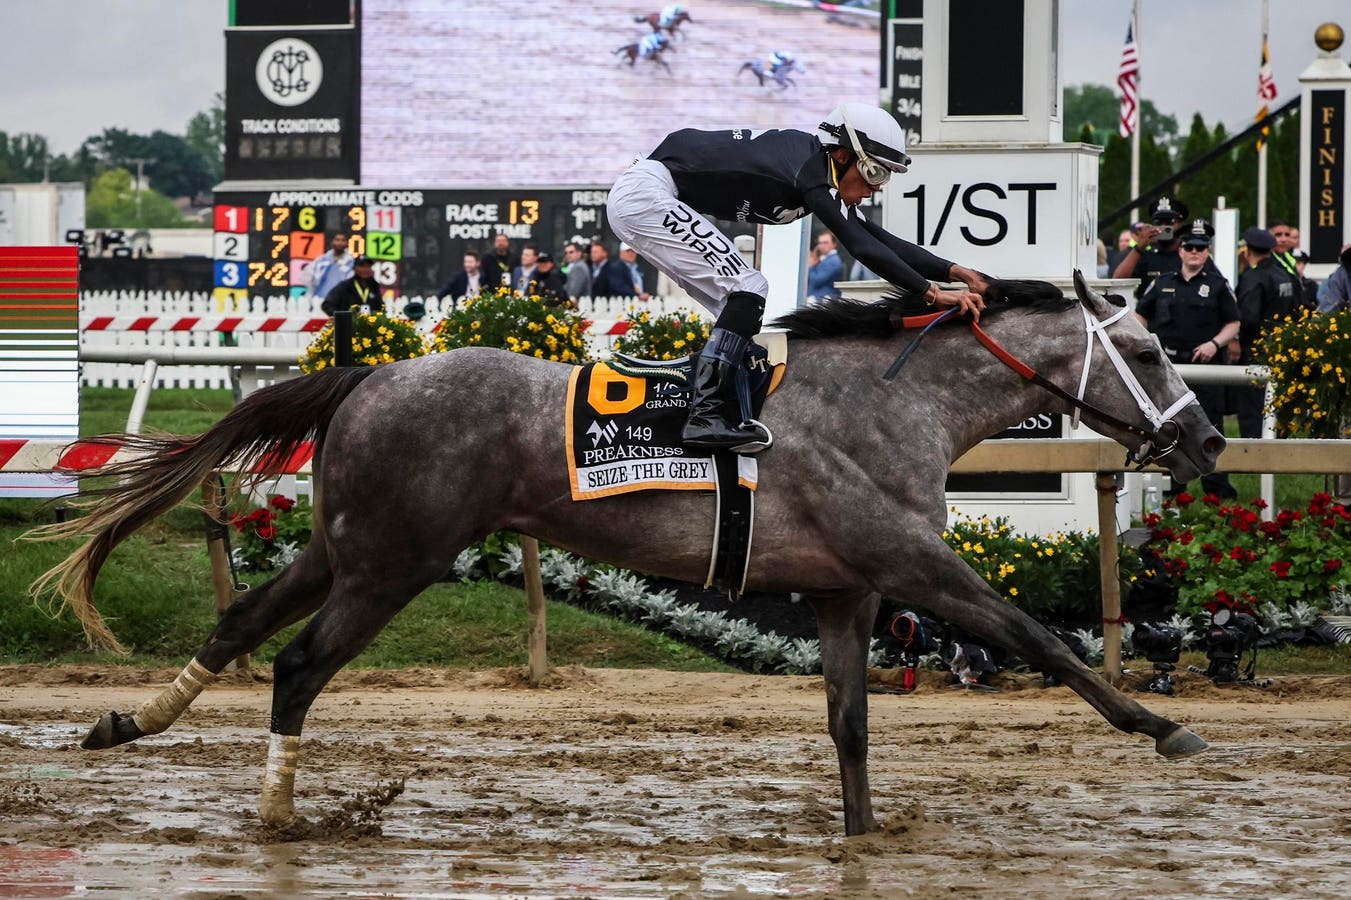 Seize The Grey Wins Wire-To-Wire, Mystik Dan Places, Catching Freedom Shows